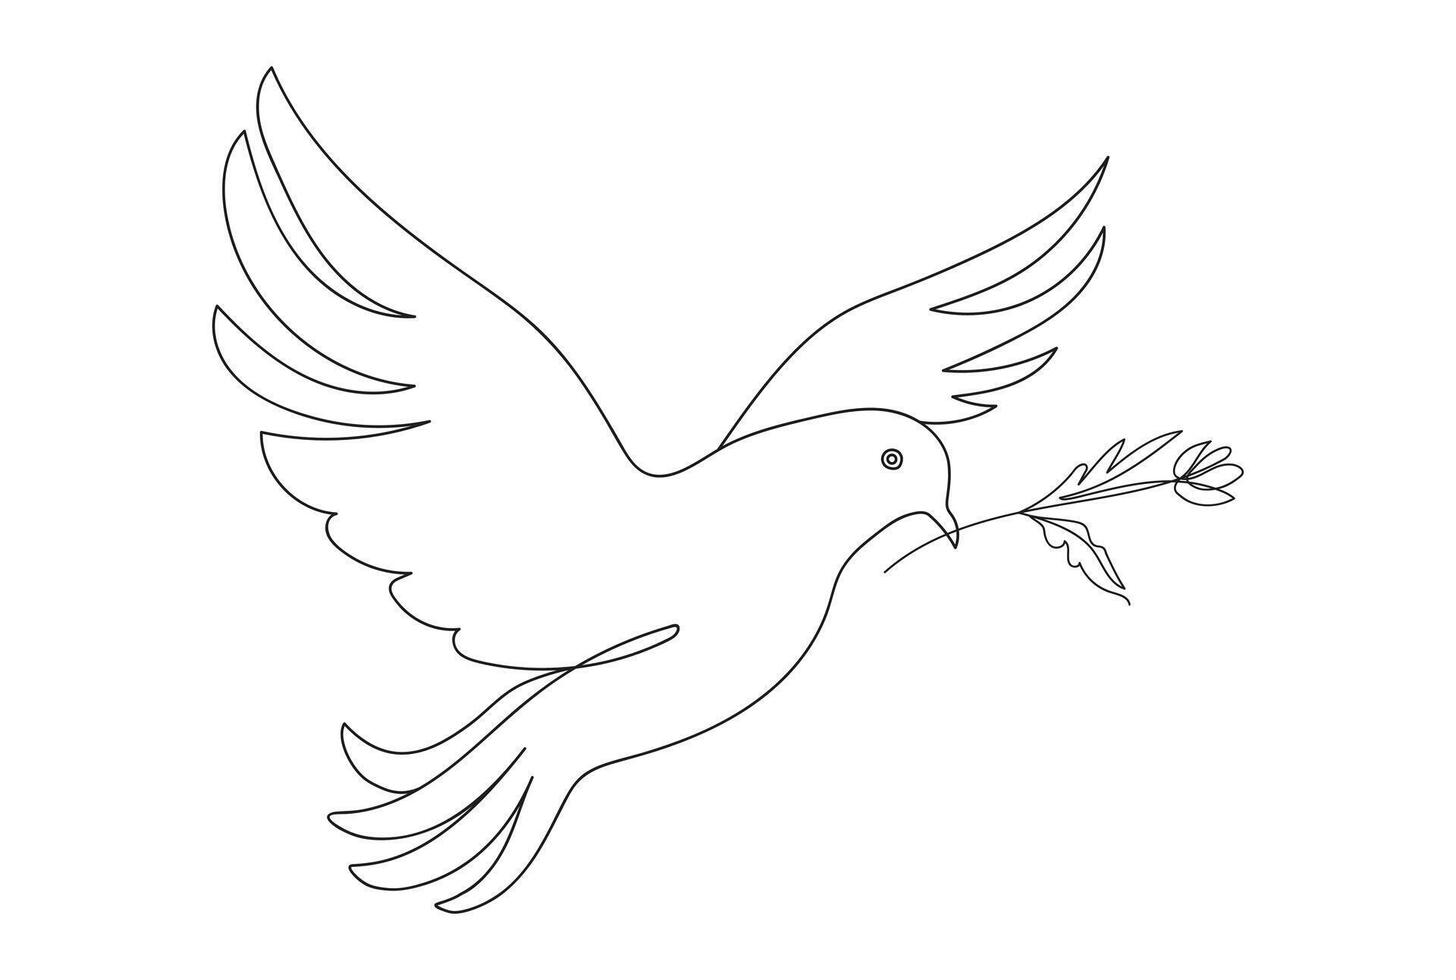 Continuous one line drawing of a pigeon in flight with a branch. Dove of peace. Line art. Concept of freedom, hope. White backdrop. Design element for print, postcard, scrapbooking, coloring book. vector